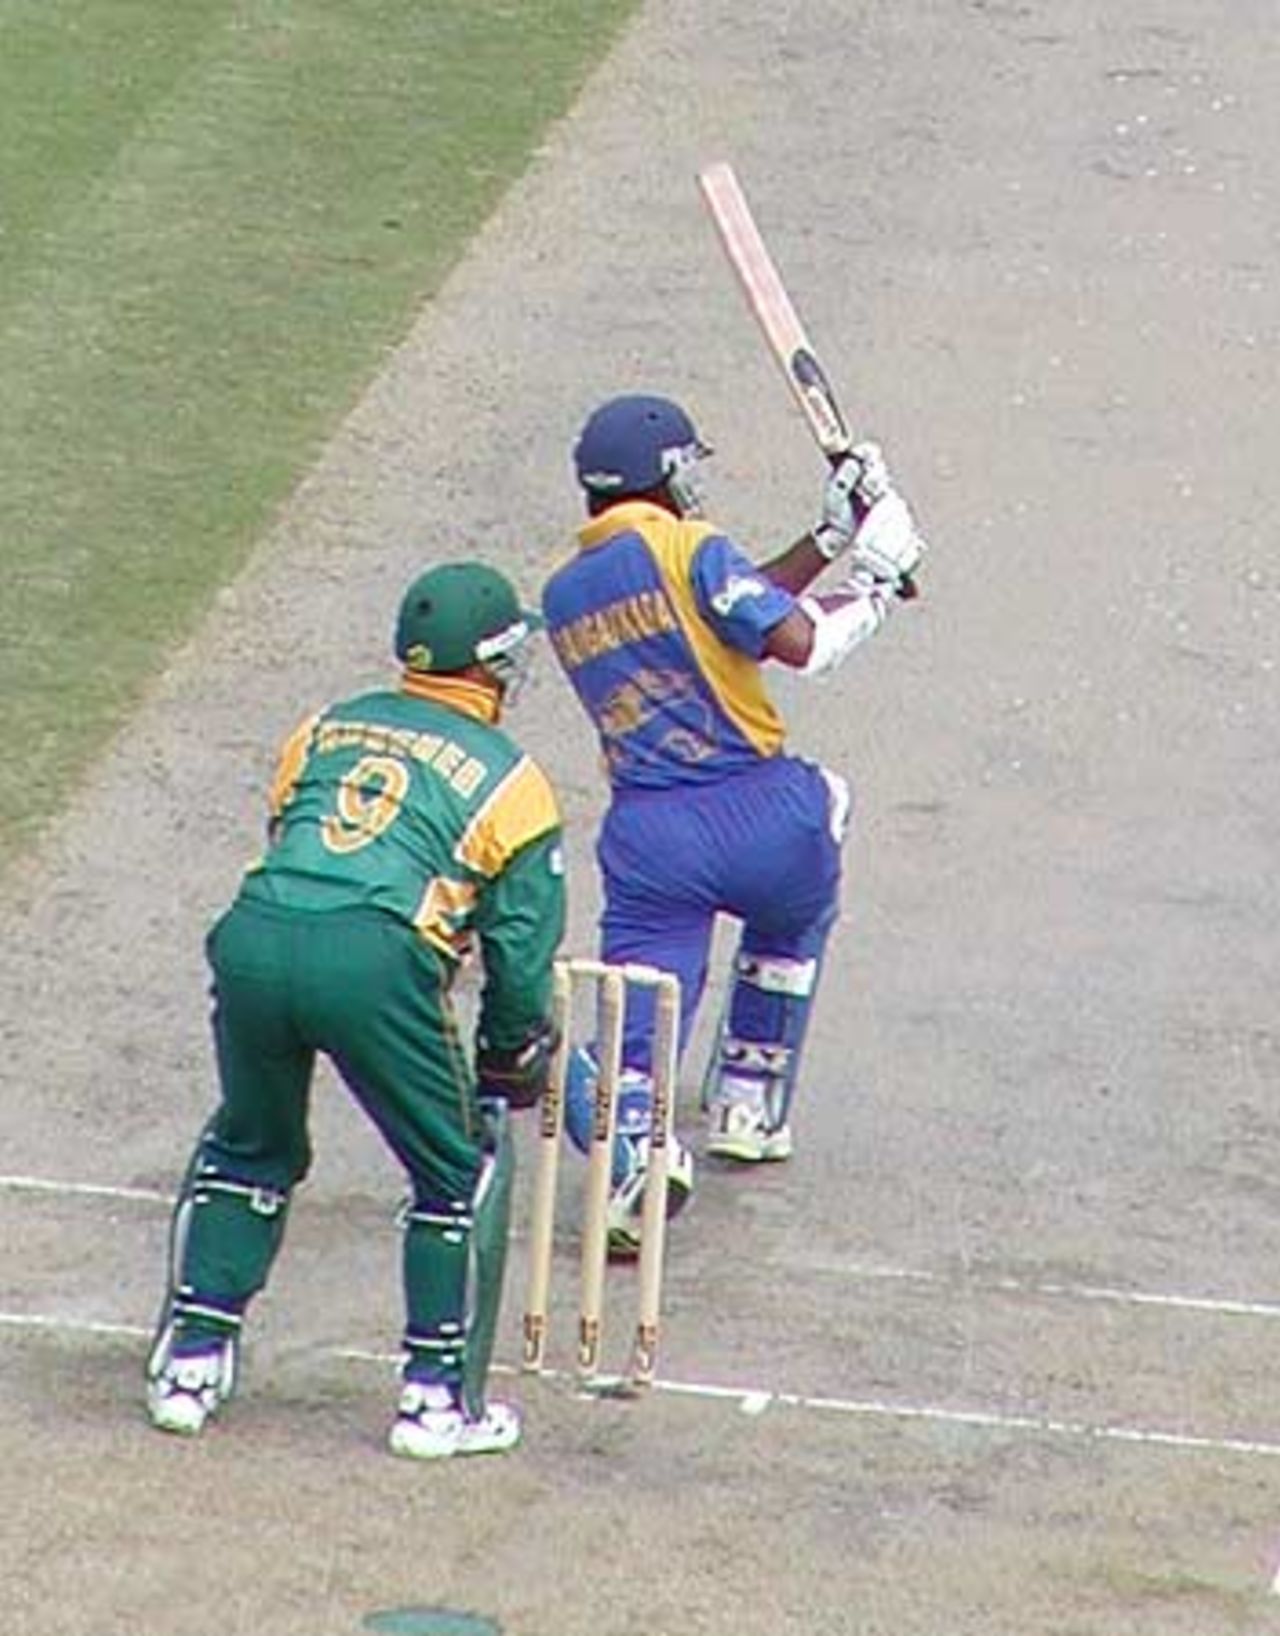 Sangakkara tries a big one but was caught, Tangier, Morocco Cup, 3rd ODI at Tangiers, South Africa v Sri Lanka, 15 Aug 2002